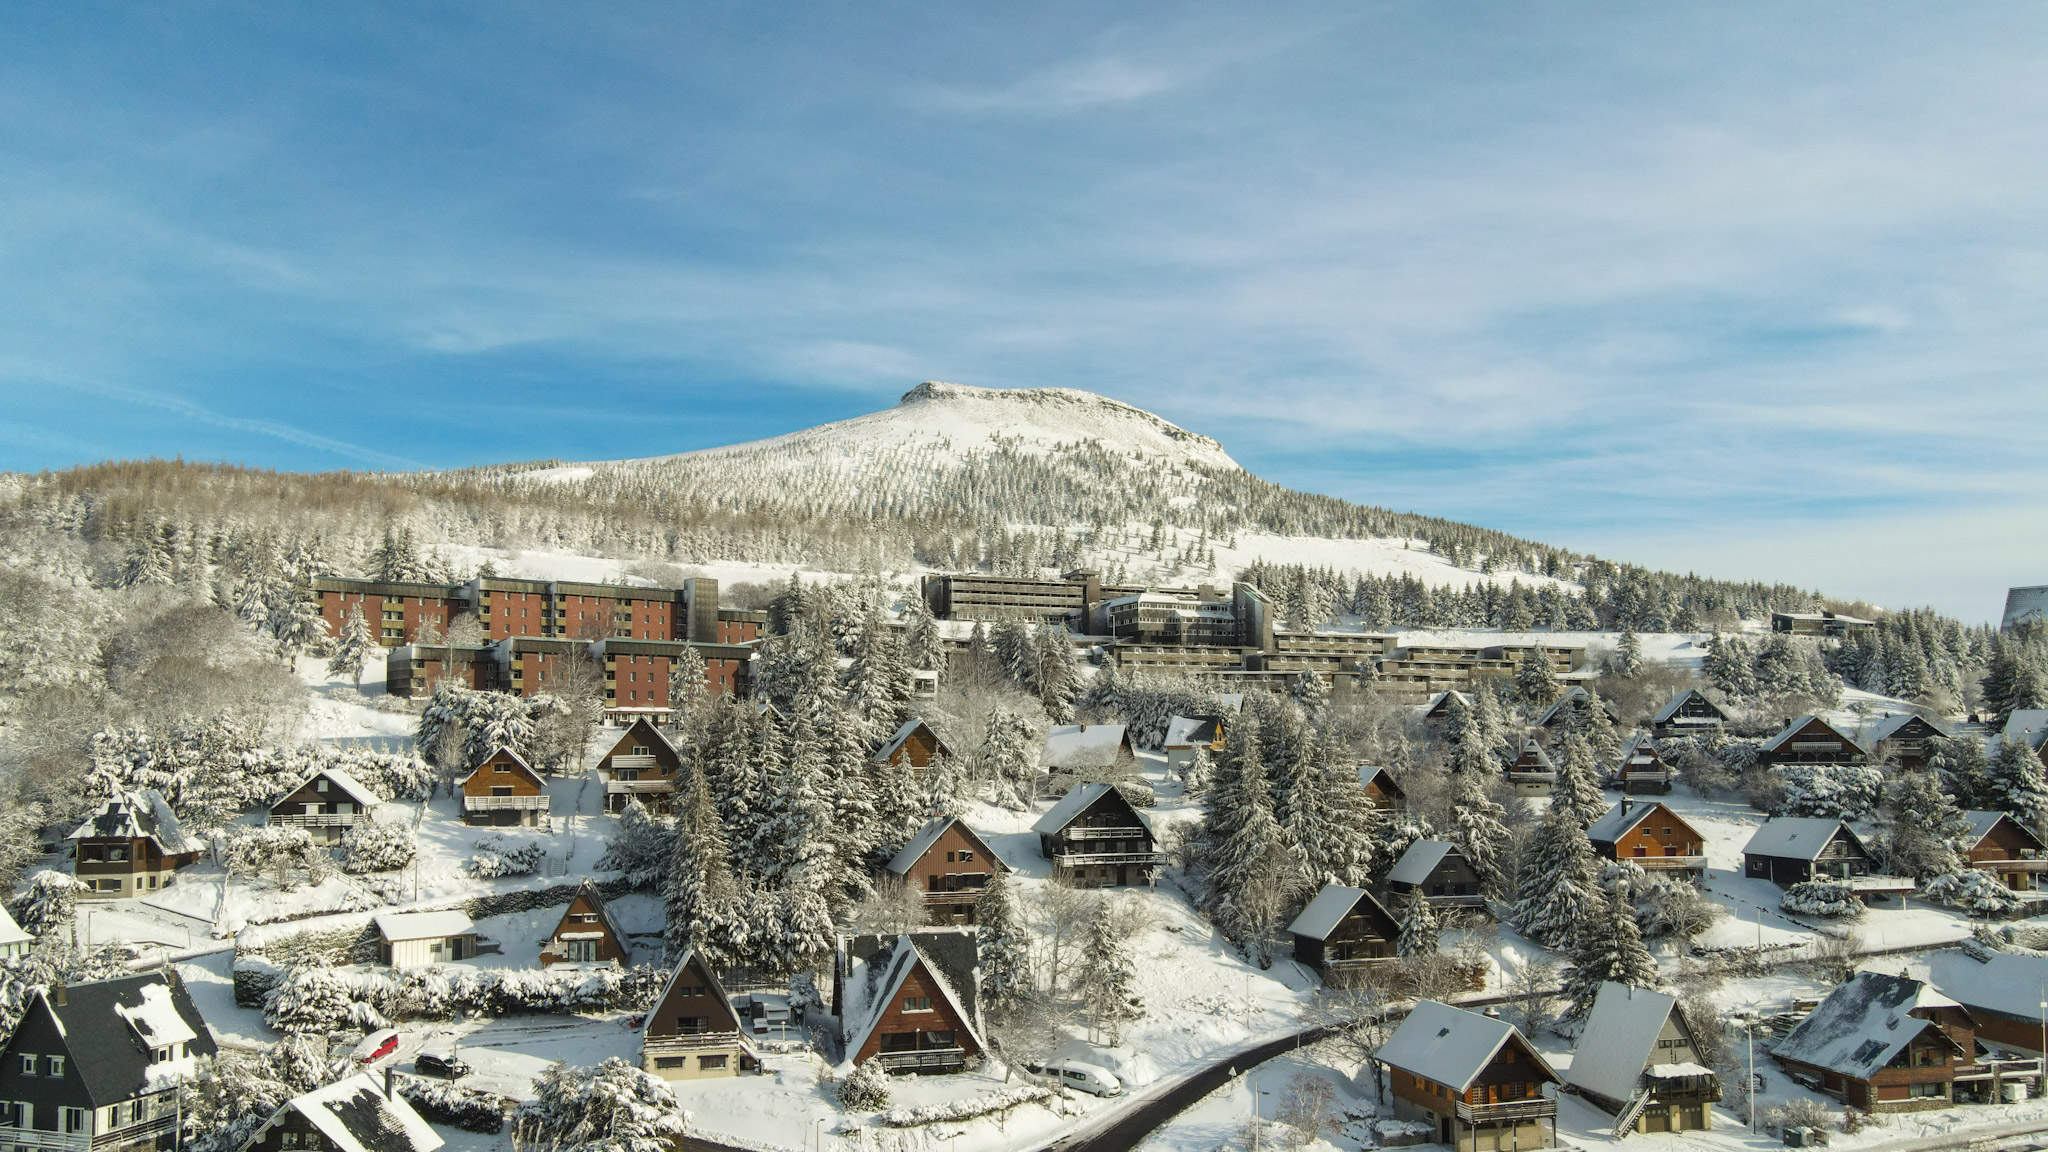 Super Besse seen from the sky, the snowy Puy du Chambourguet